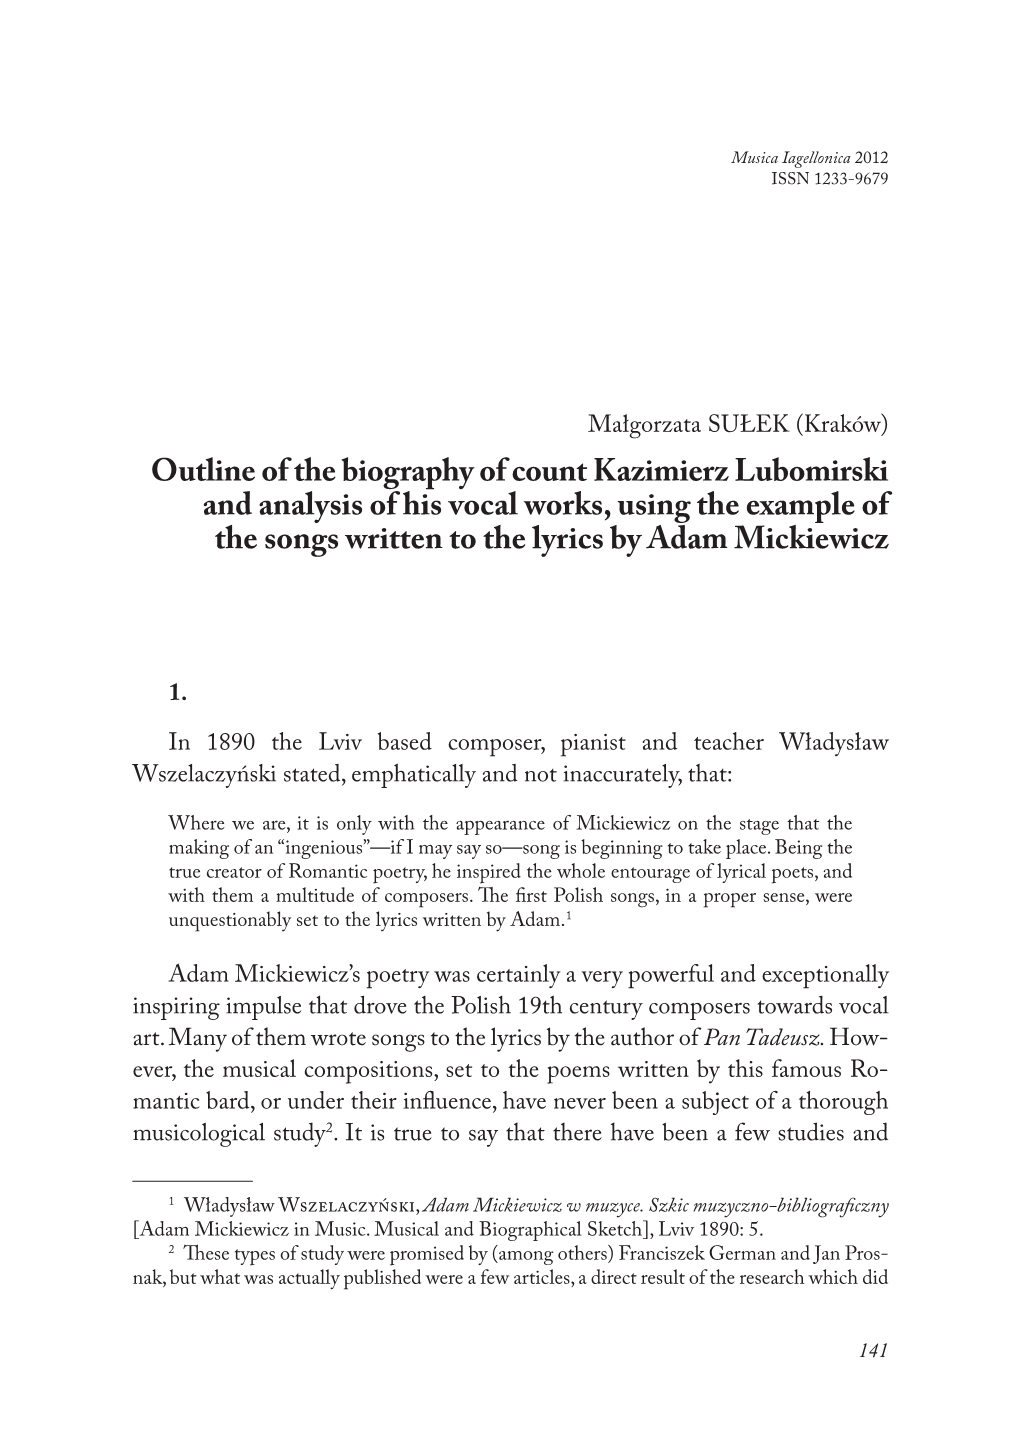 Outline of the Biography of Count Kazimierz Lubomirski and Analysis of His Vocal Works, Using the Example of the Songs Written to the Lyrics by Adam Mickiewicz